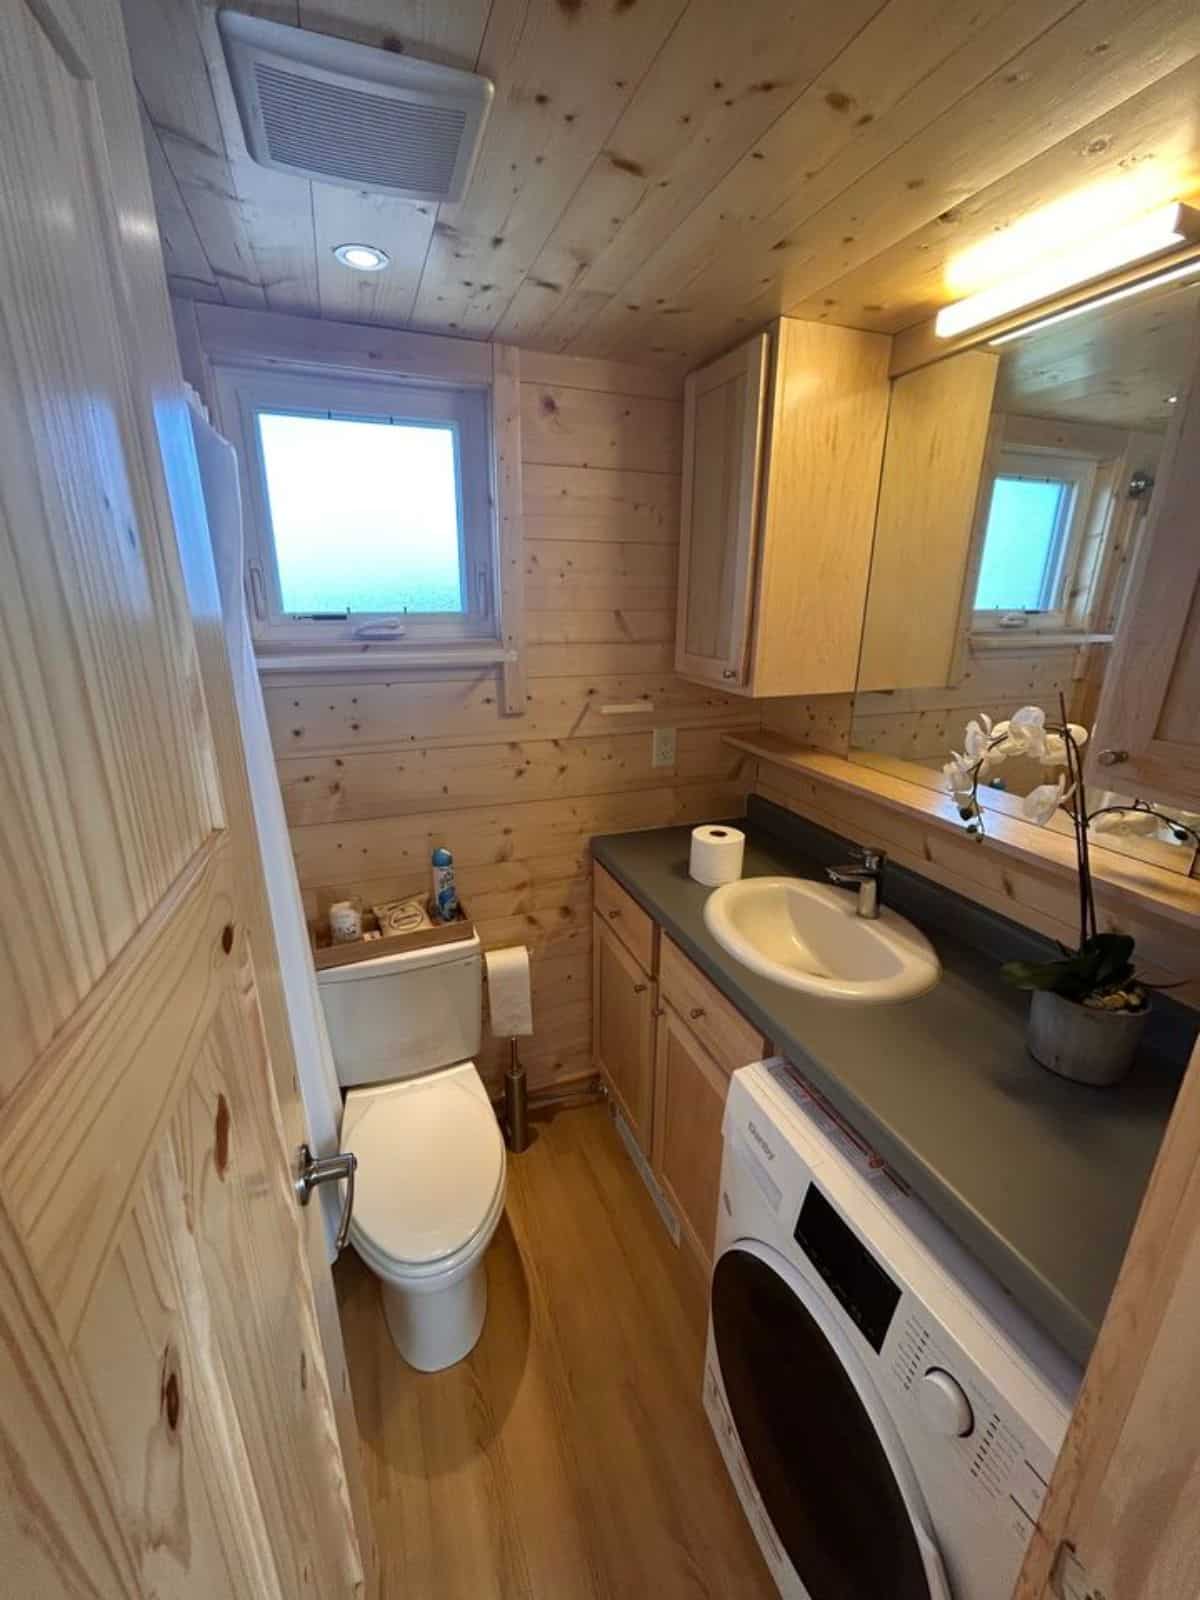 bathroom of certified tiny home has all the standard fittings with washer dryer combo